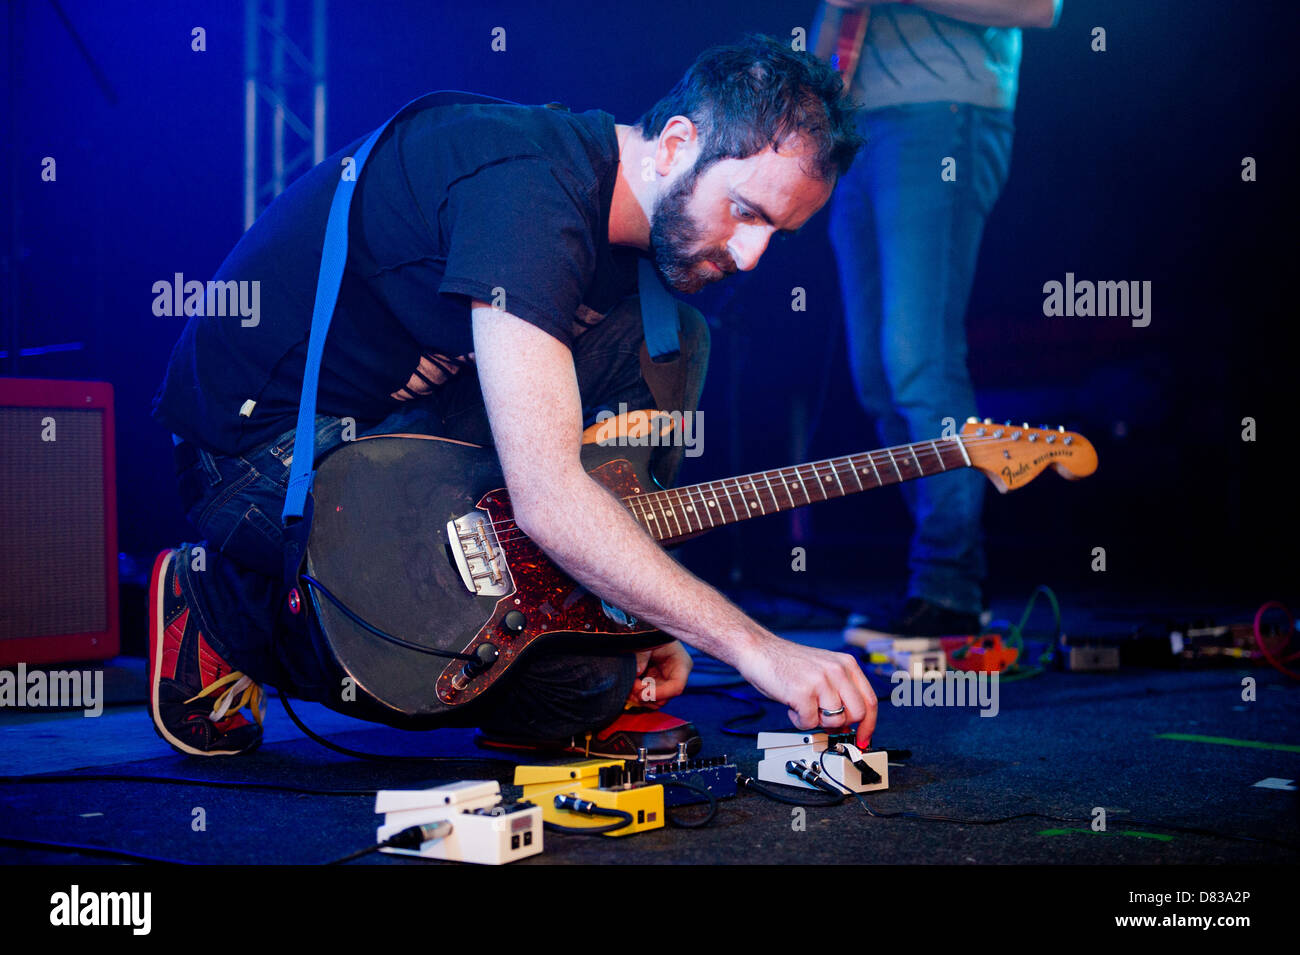 Swansea, UK. 17th May 2013. Fist Of The First Man perform at Sin City during Pili Pala Festival 2013. Credit:  Polly Thomas / Alamy Live News Stock Photo